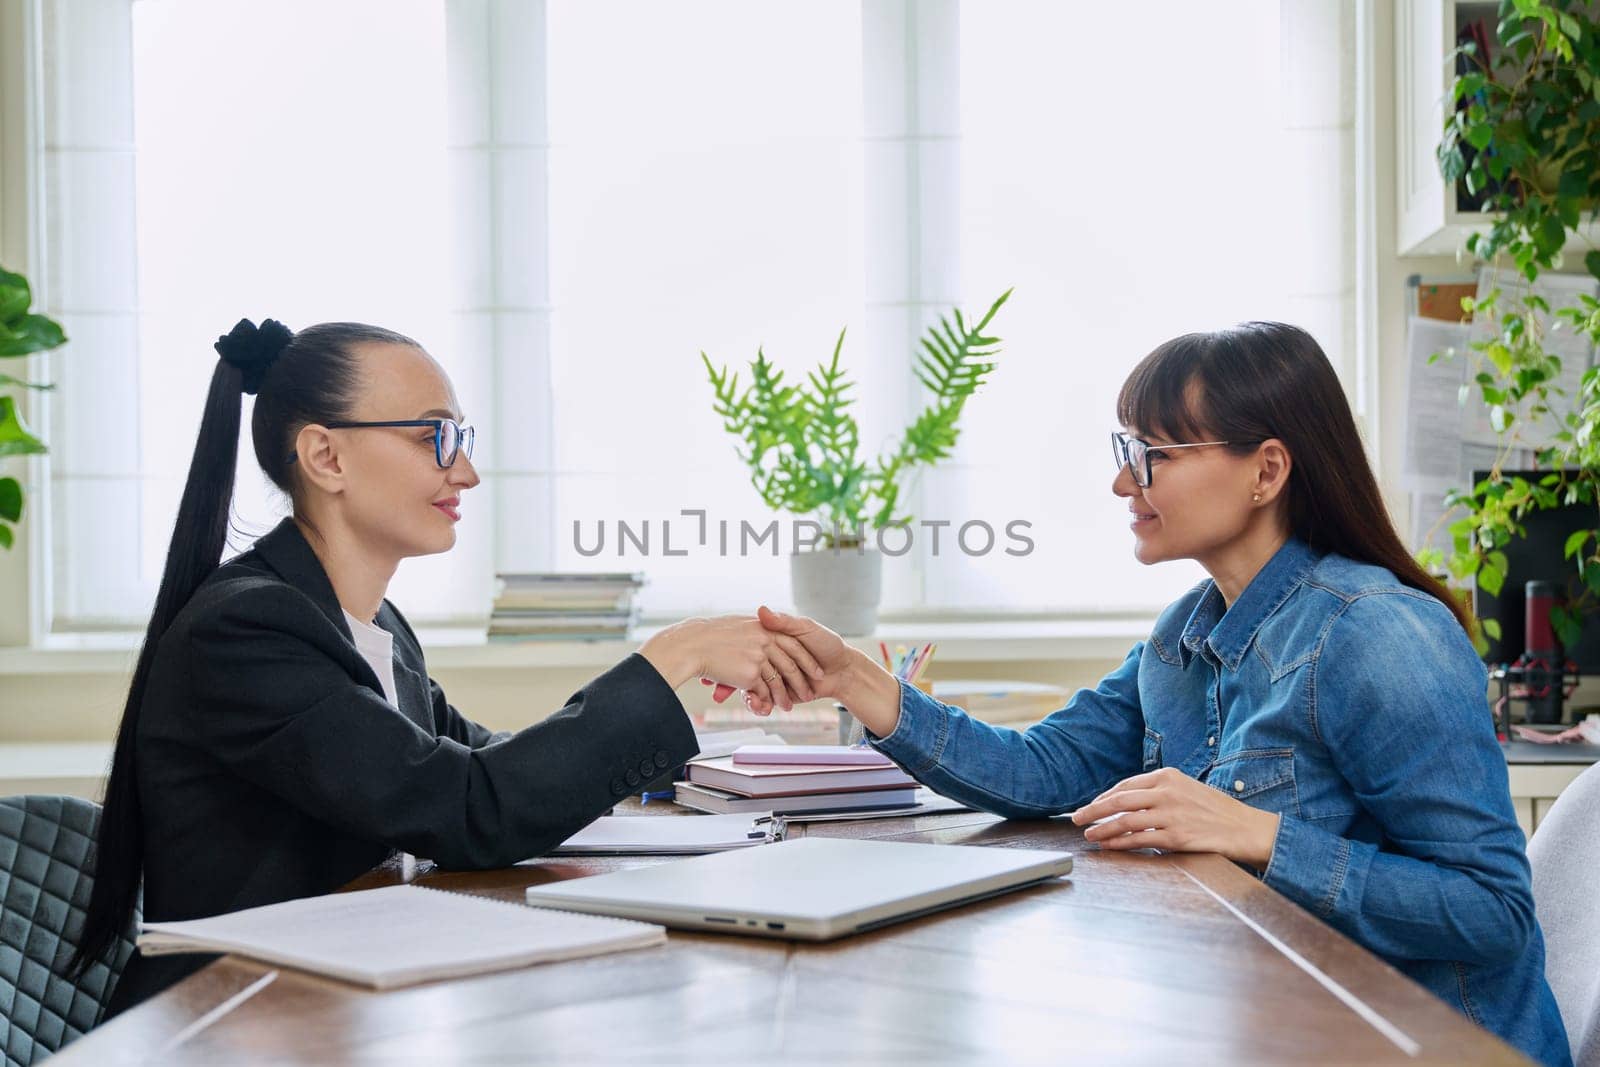 Mental therapy session of mature female with professional psychologist counselor. Talking women sitting at table, shaking hands sign greeting, psychology, psychotherapy, support help treatment concept